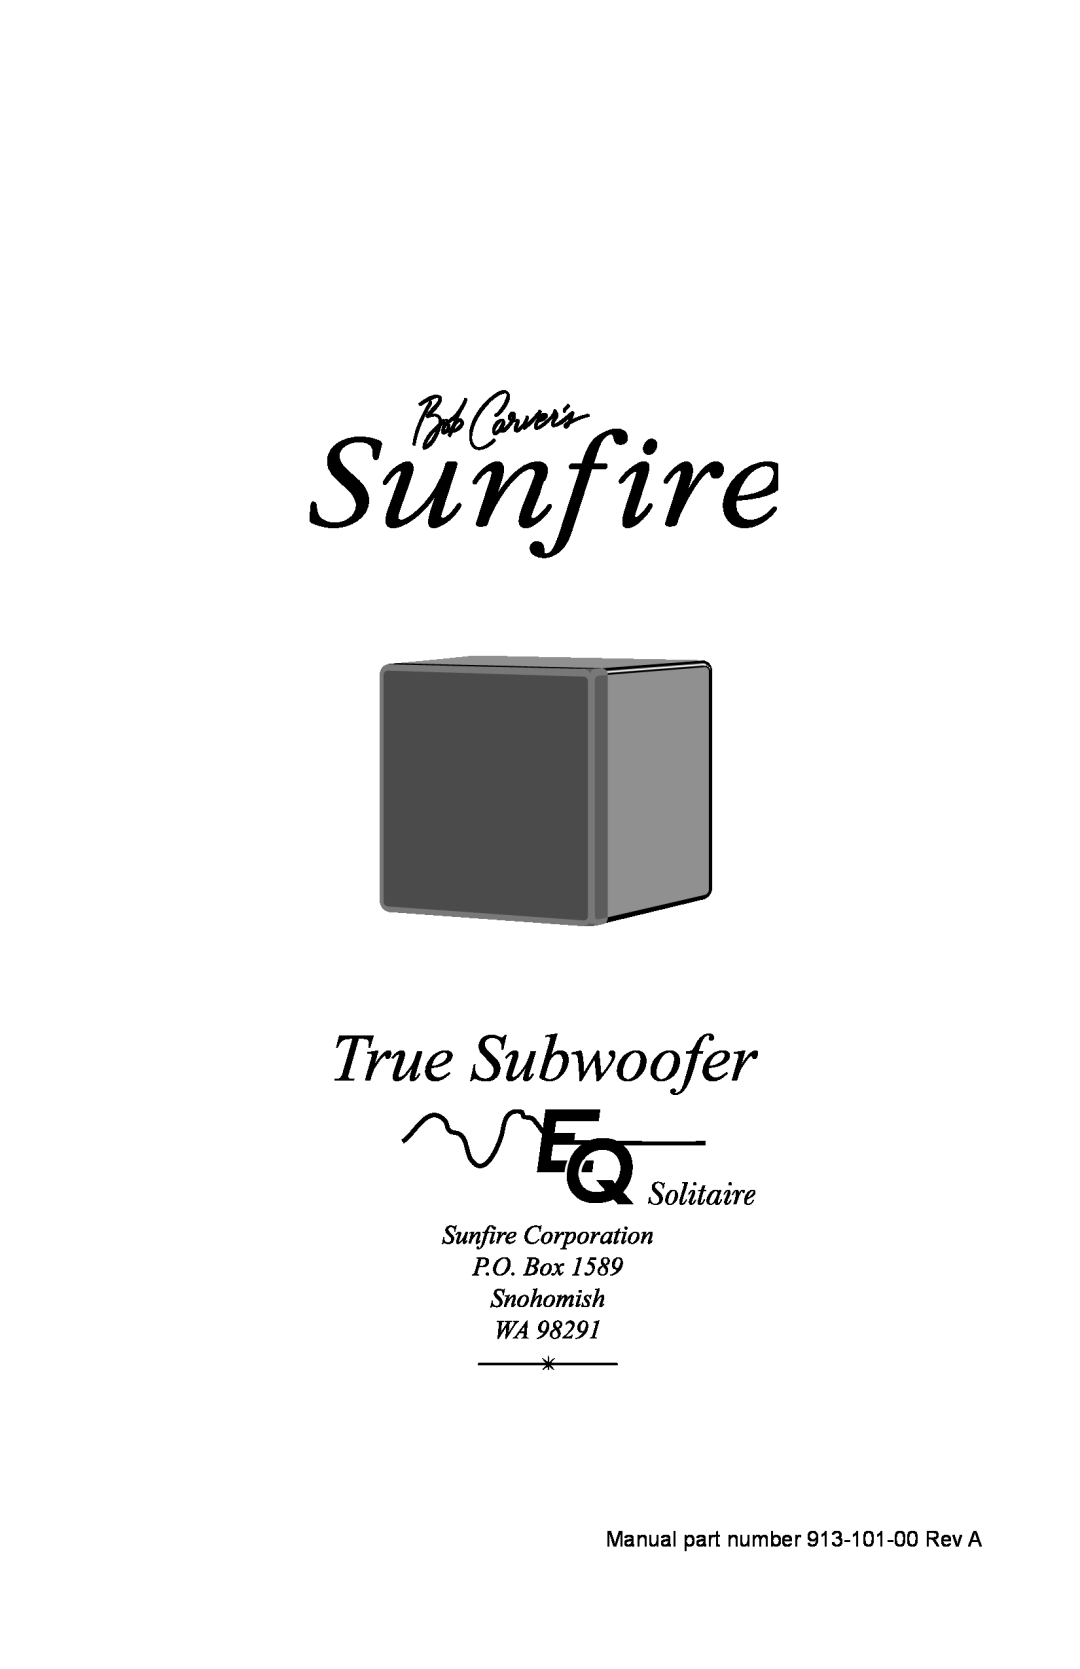 Sunfire 12 user manual Solitaire, Manual part number 913-101-00Rev A 